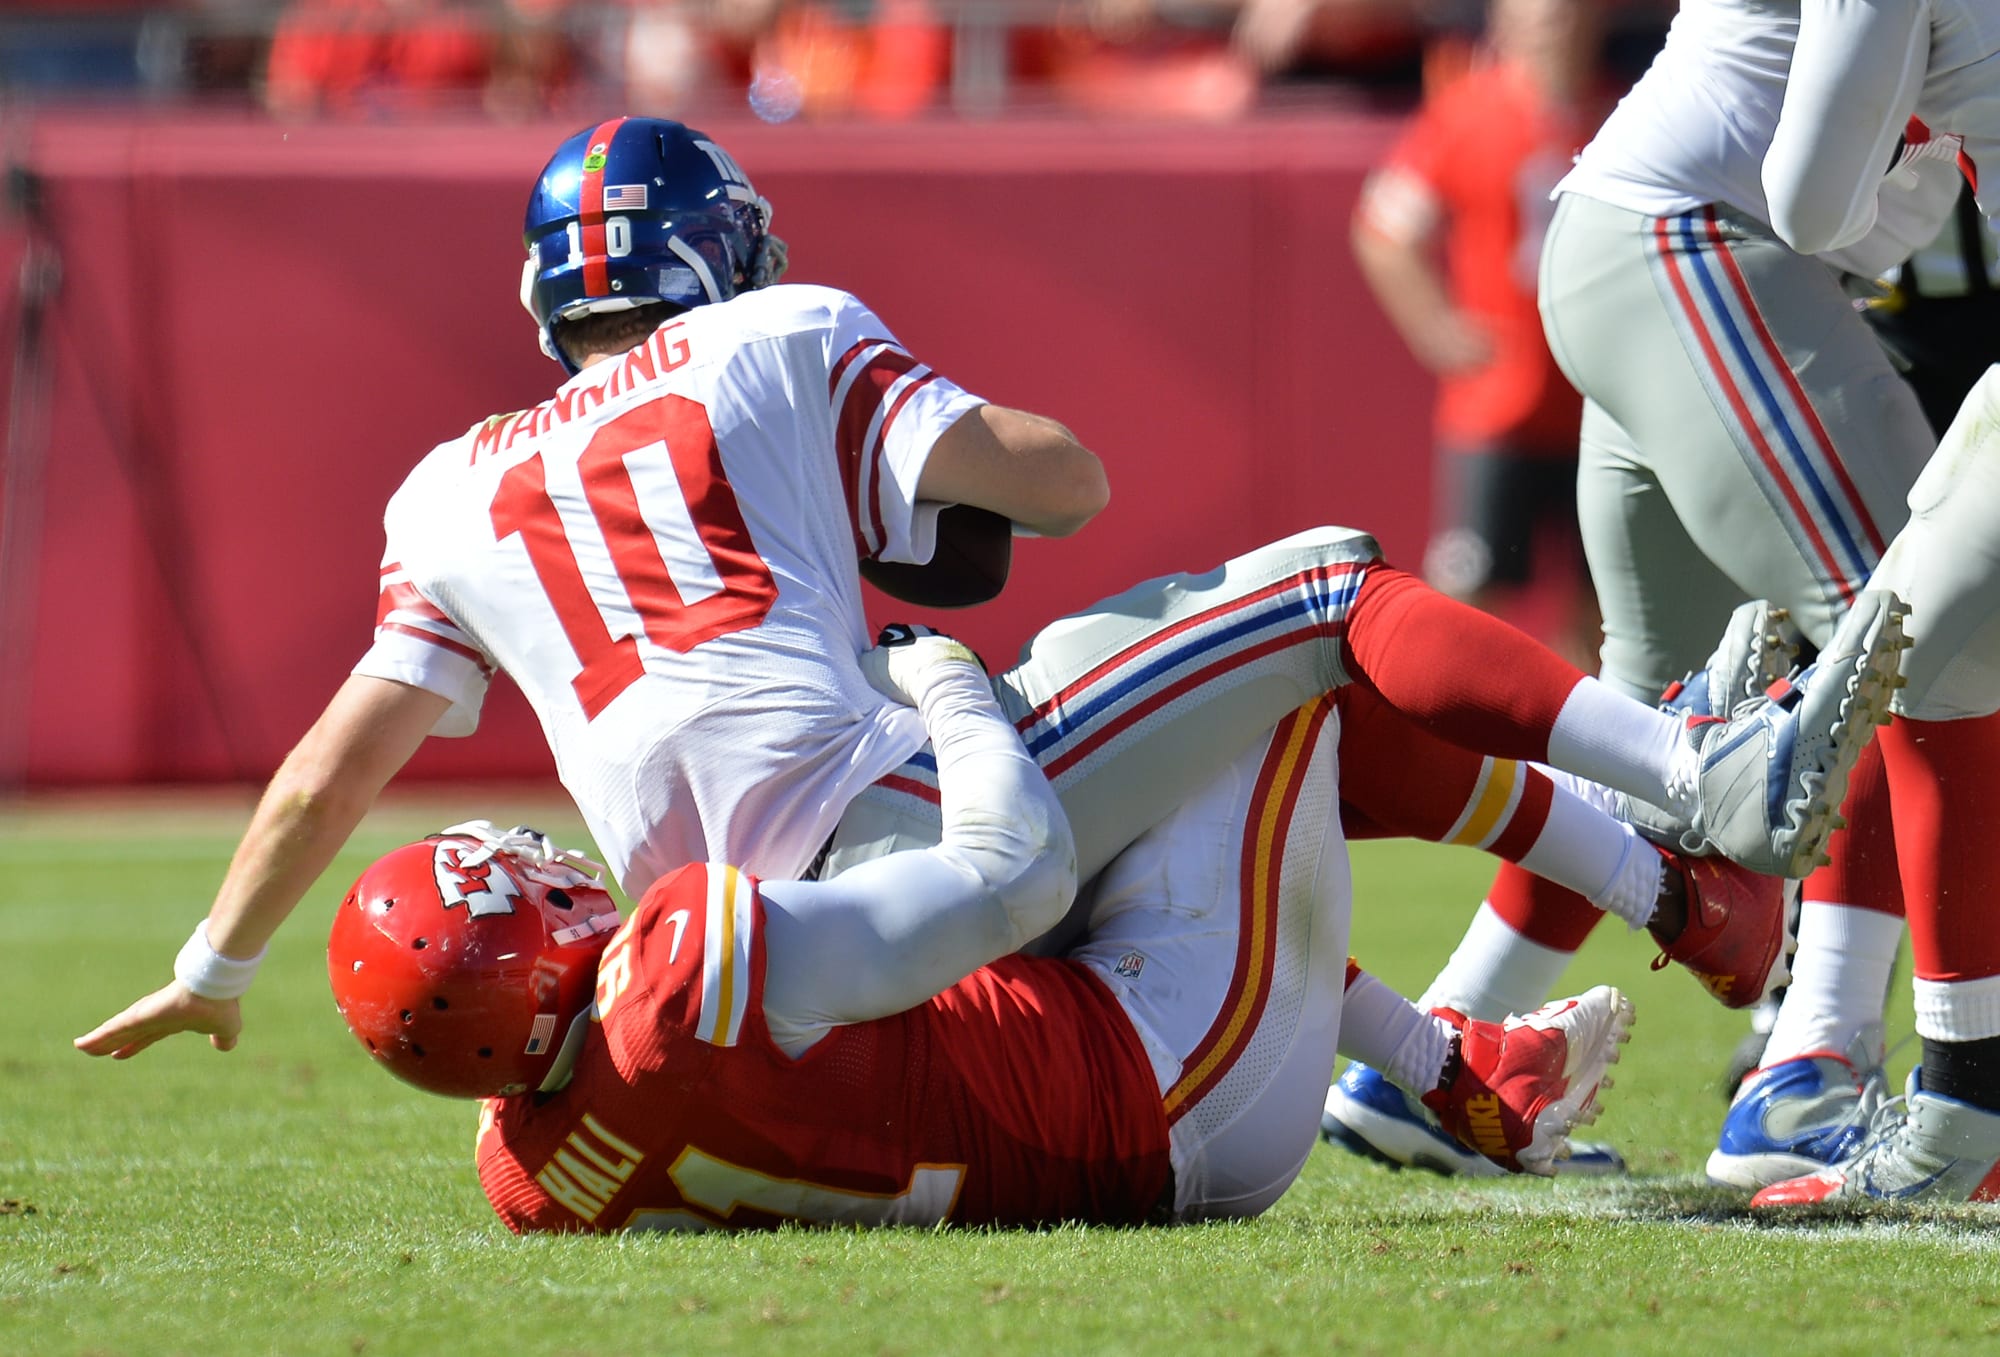 New York Giants vs Kansas City Chiefs Where to watch, listen, and more